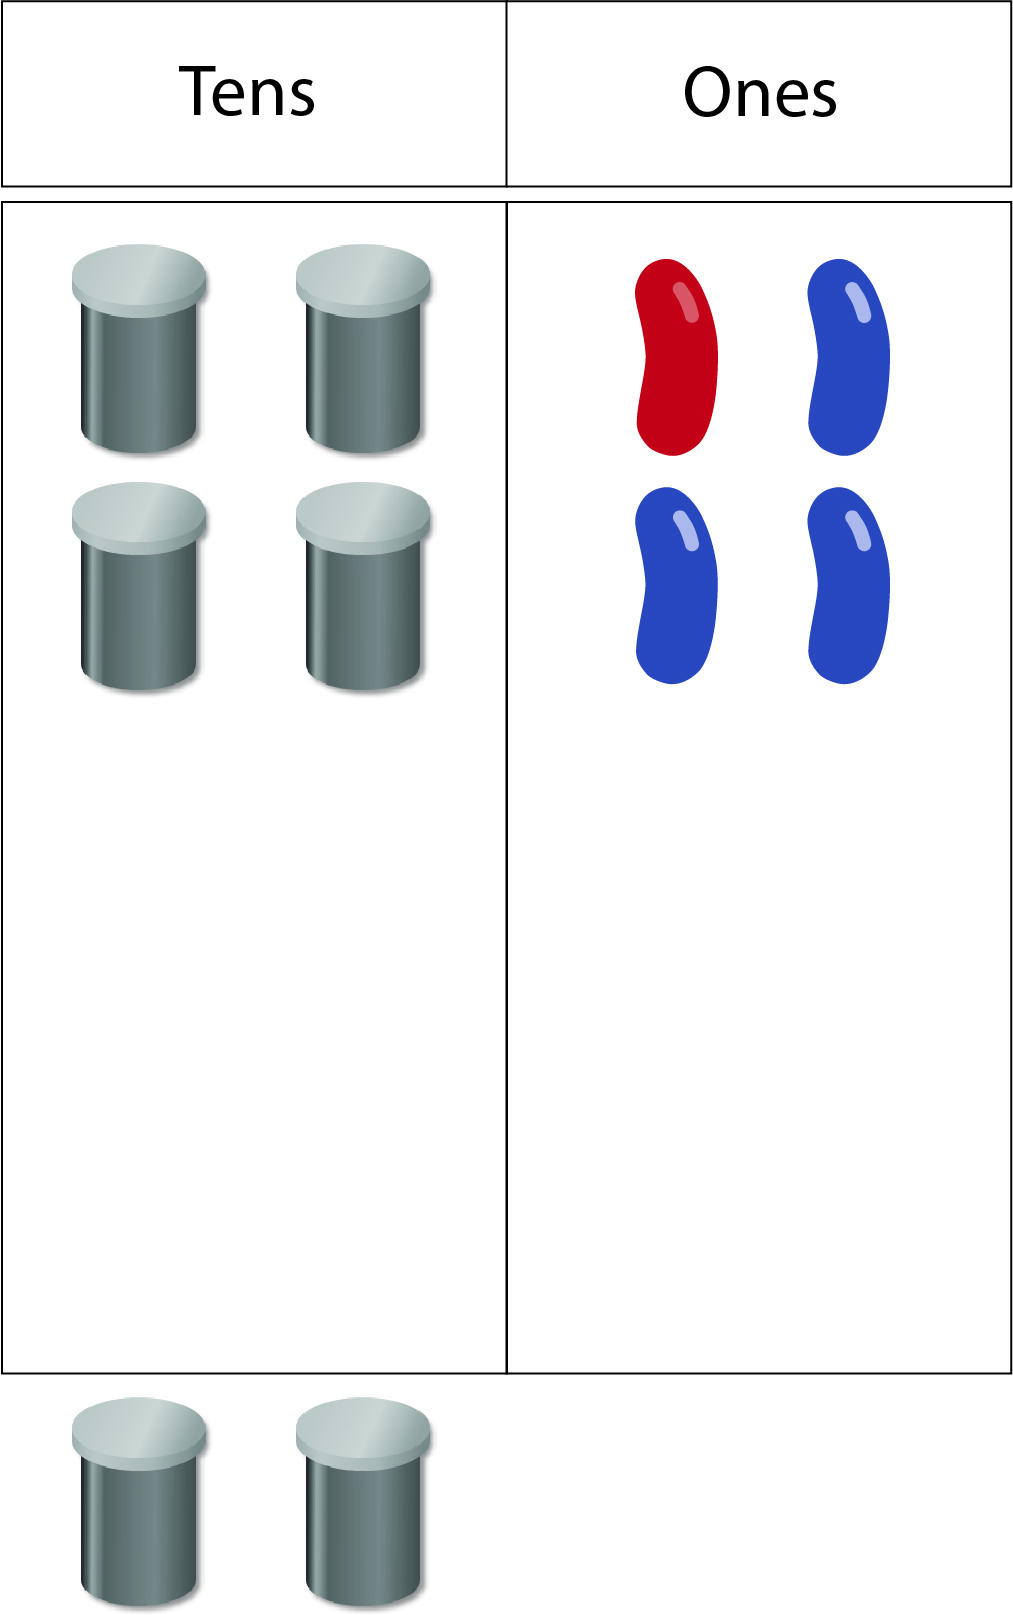 Image of a two-column (tens and ones) place value board displaying six ten-bean canisters in the tens column, and four individual beans in the ones column. Two of the ten-bean canisters have been removed from the tens column. This represents 64 - 27 = 47.